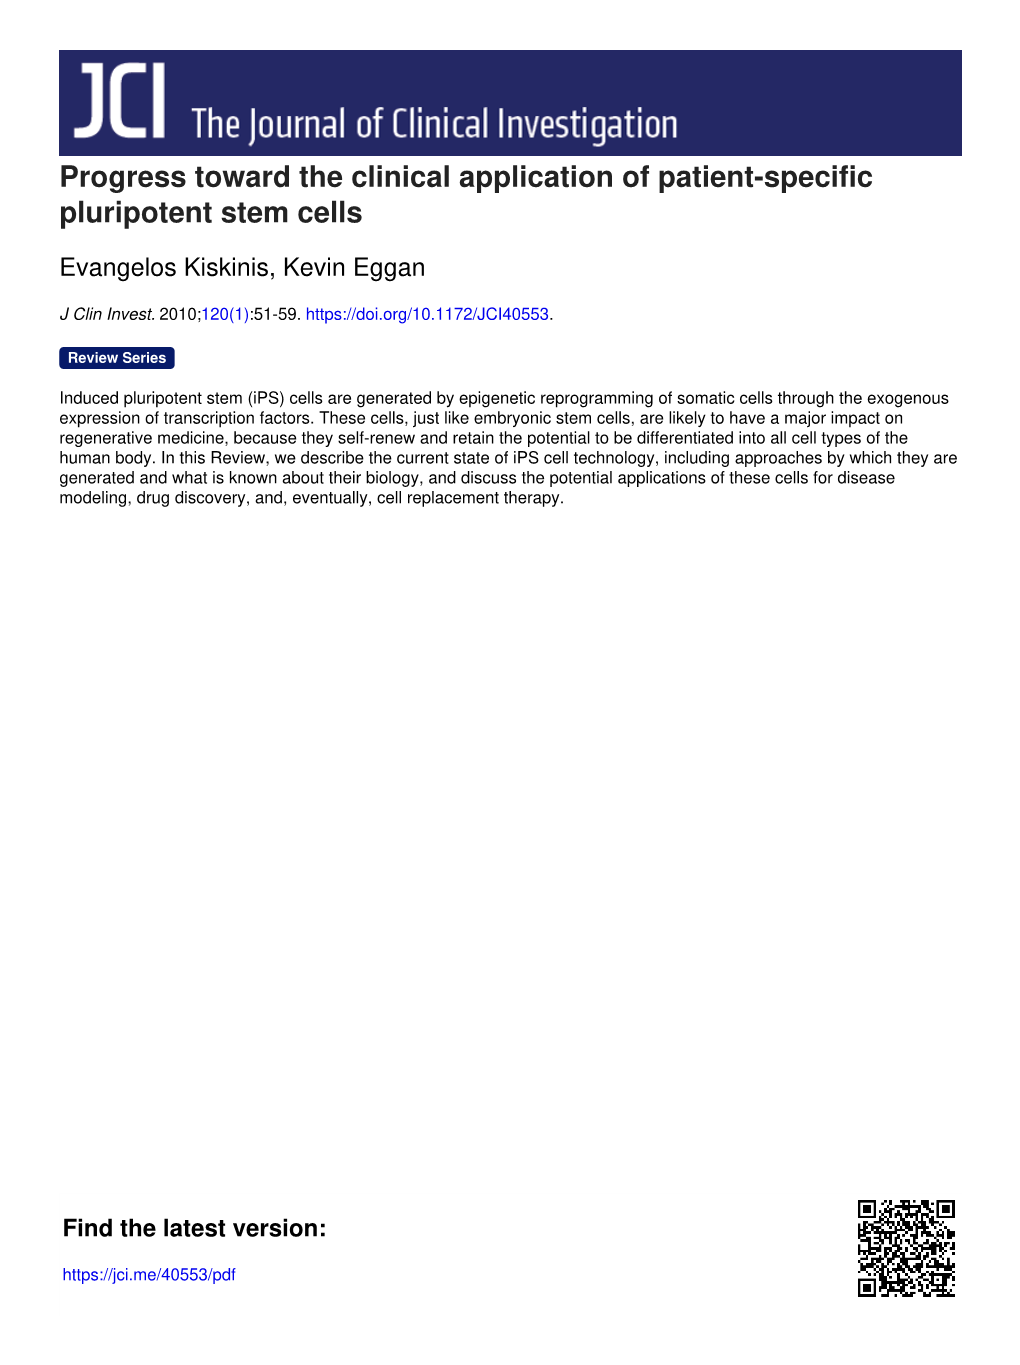 Progress Toward the Clinical Application of Patient-Specific Pluripotent Stem Cells